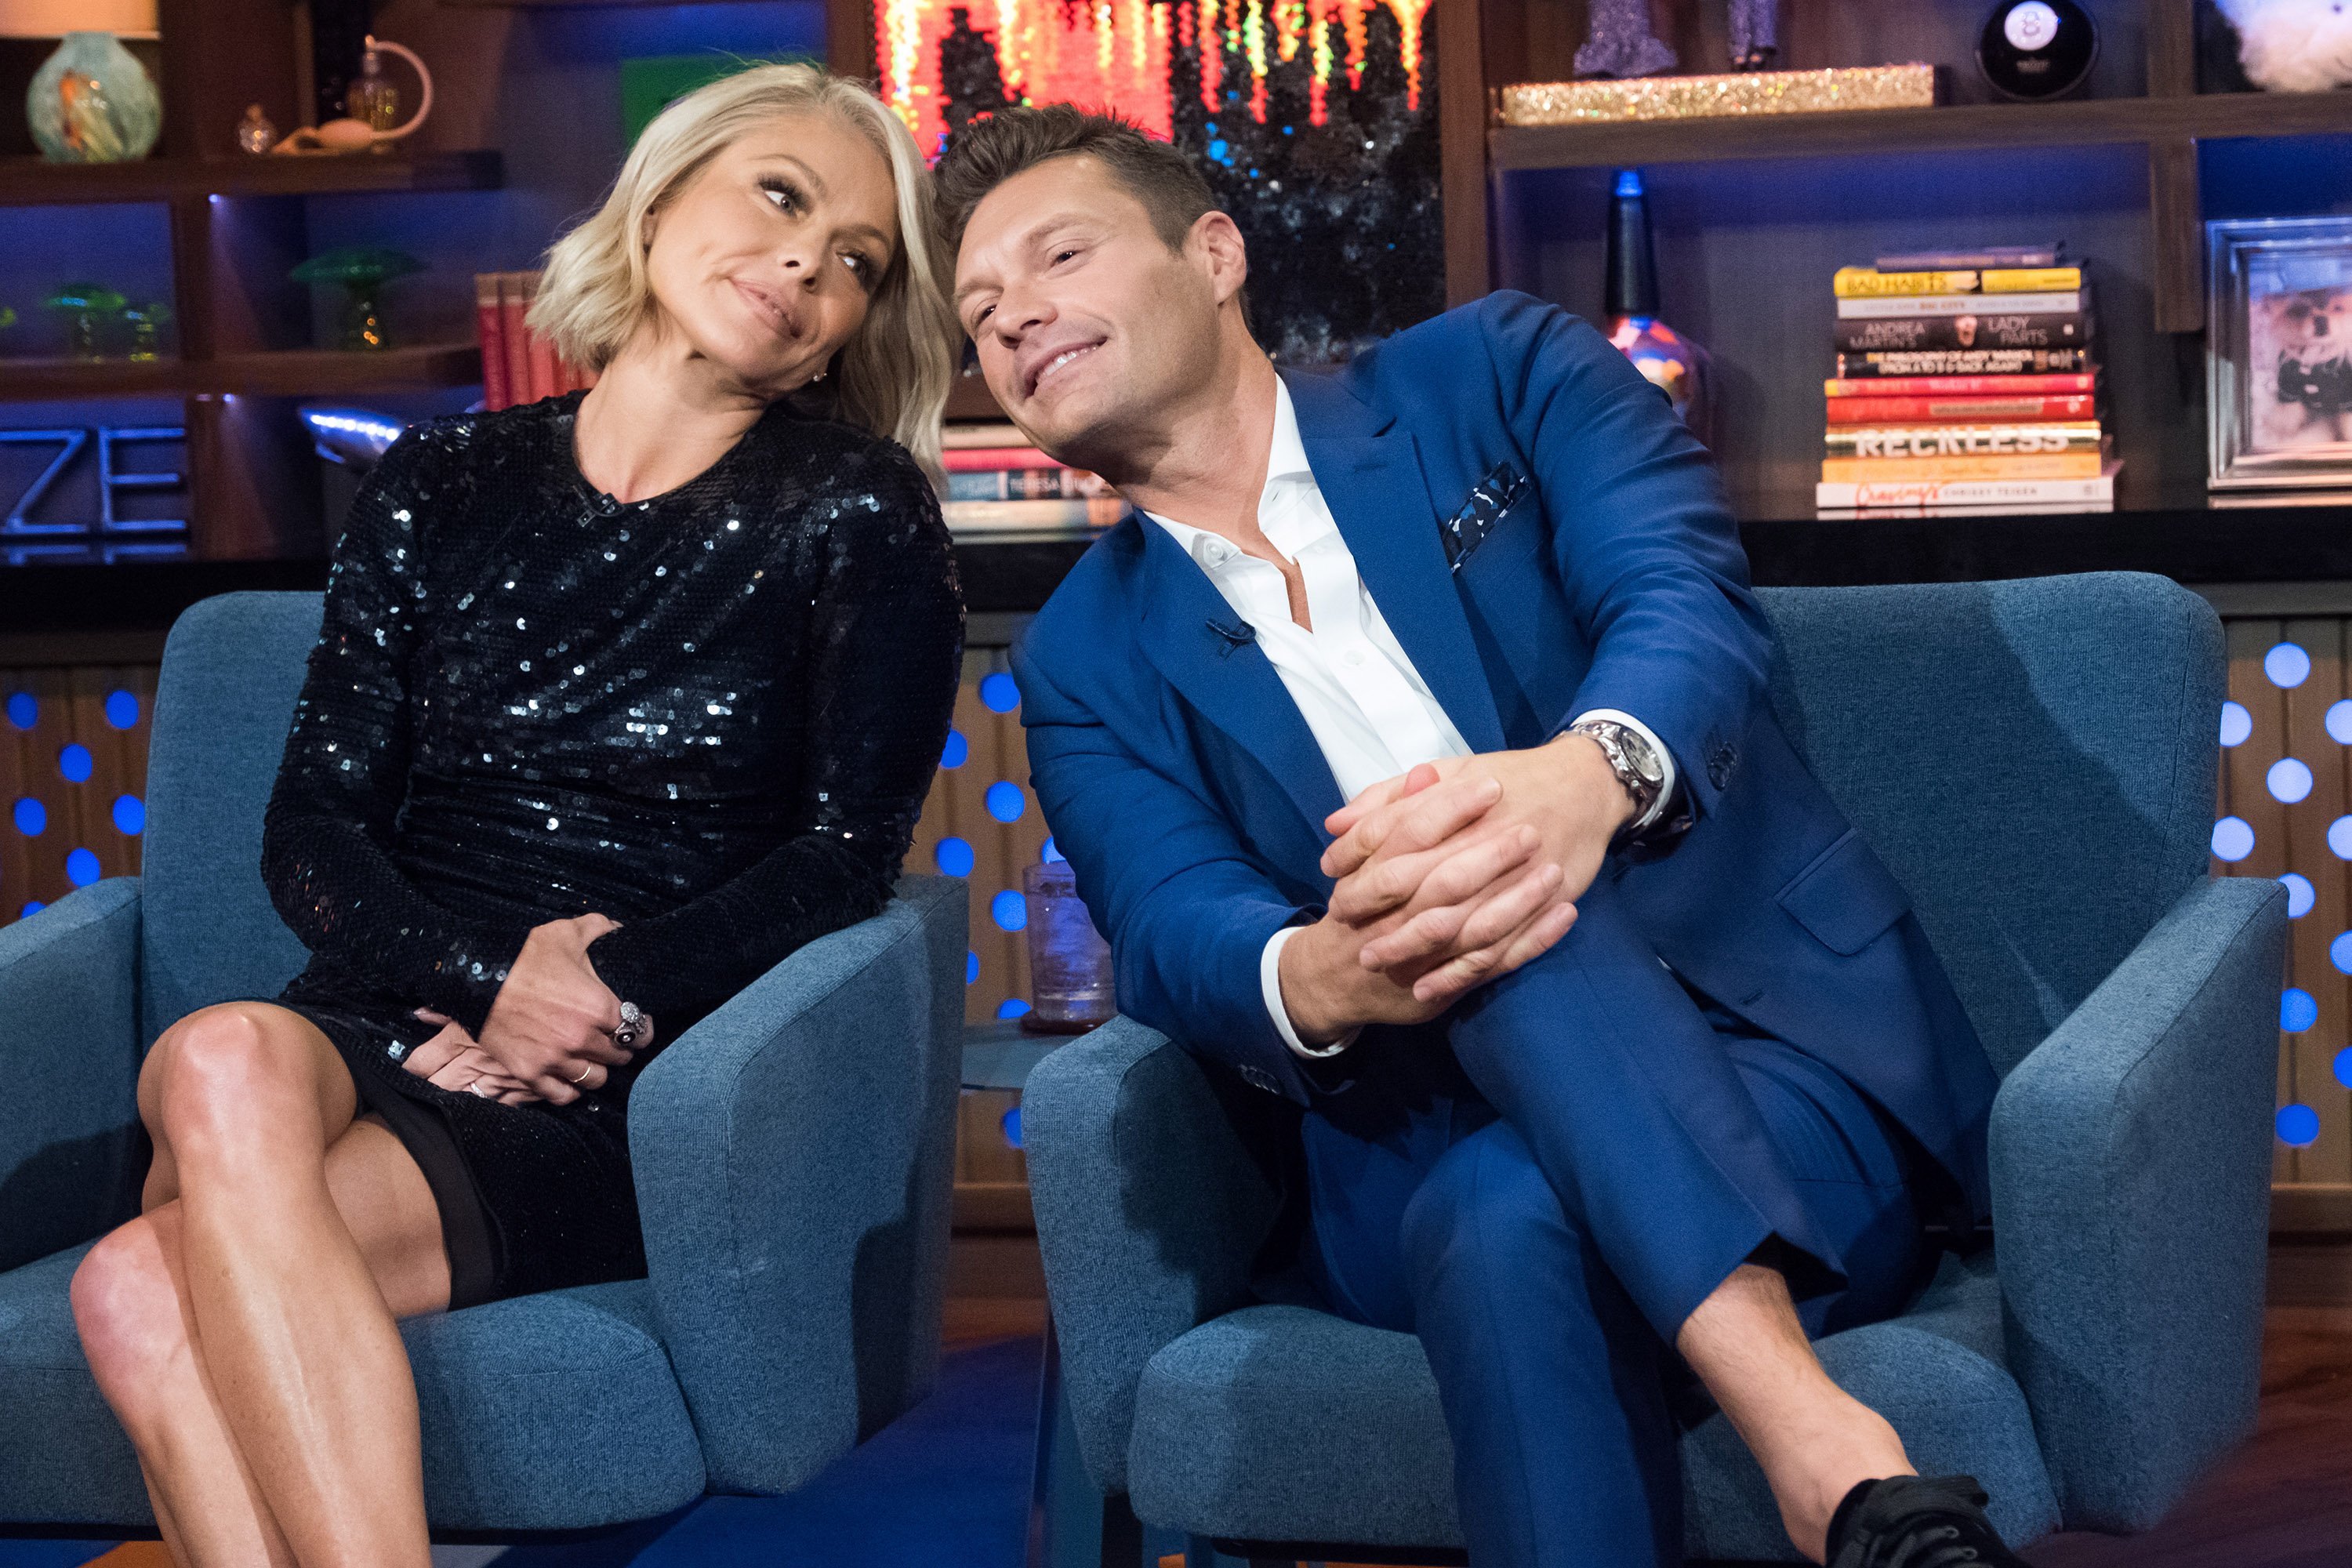 Kelly Ripa and Ryan Seacrest during an episode of "Watch What Happens Live With Andy Cohen" on September 21, 2017. | Source: Getty Images.